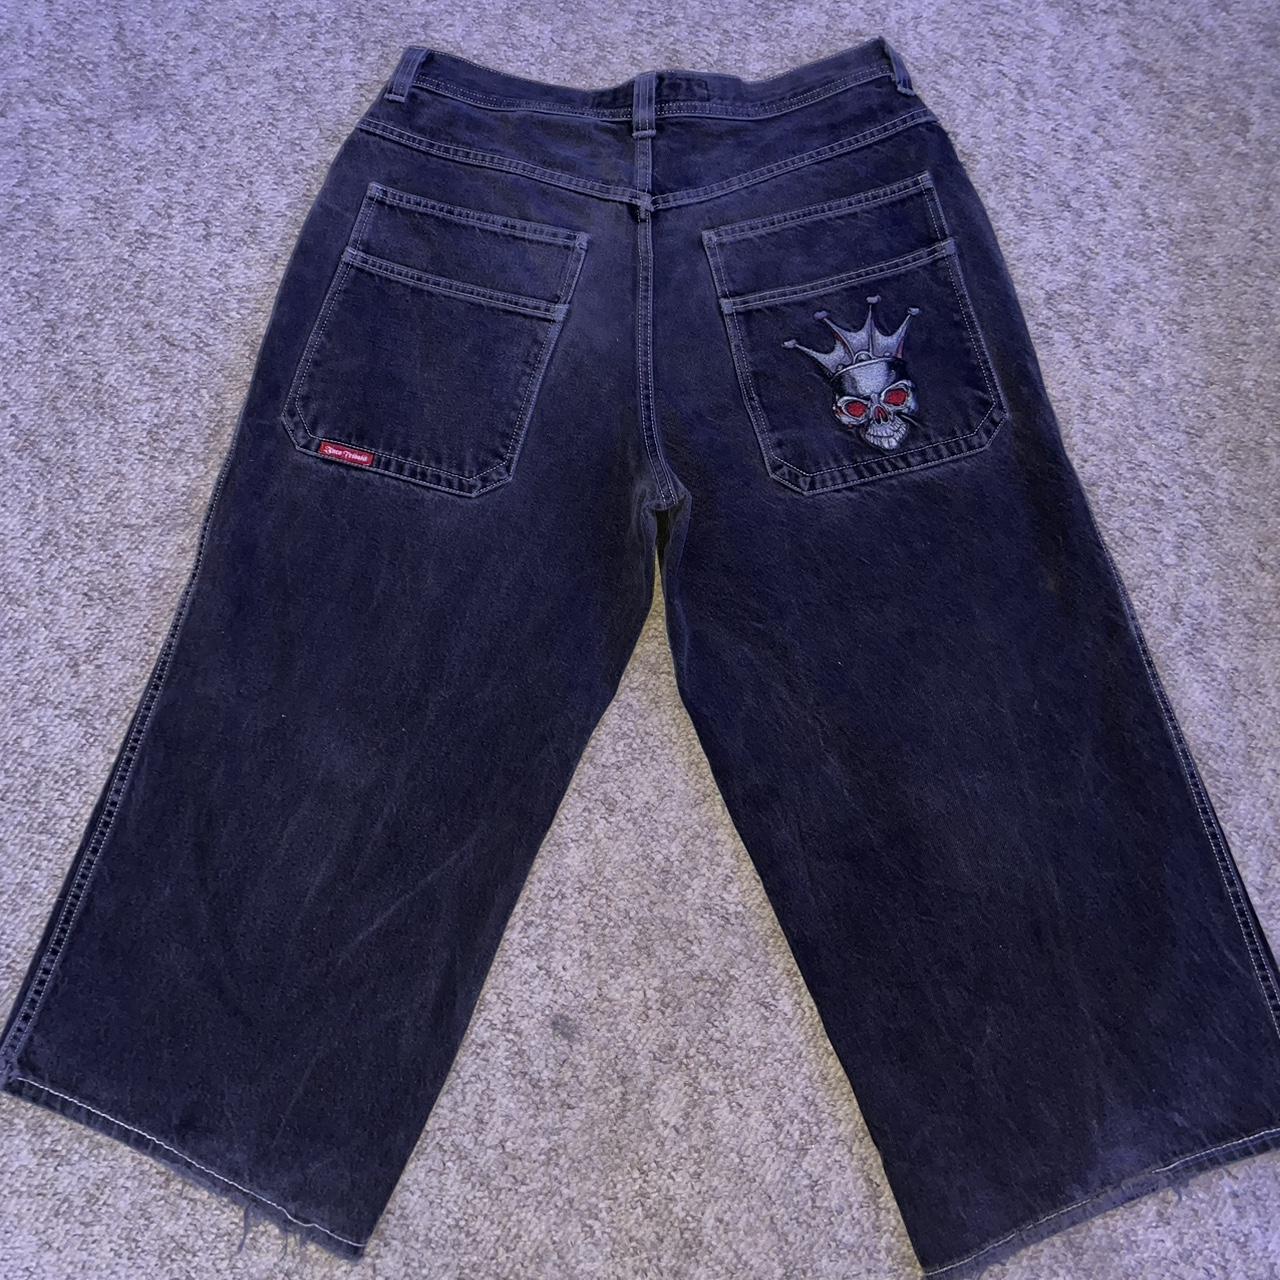 Rare Jnco Jeans OPEN FOR TRADES IM ASKING 300 These... - Depop